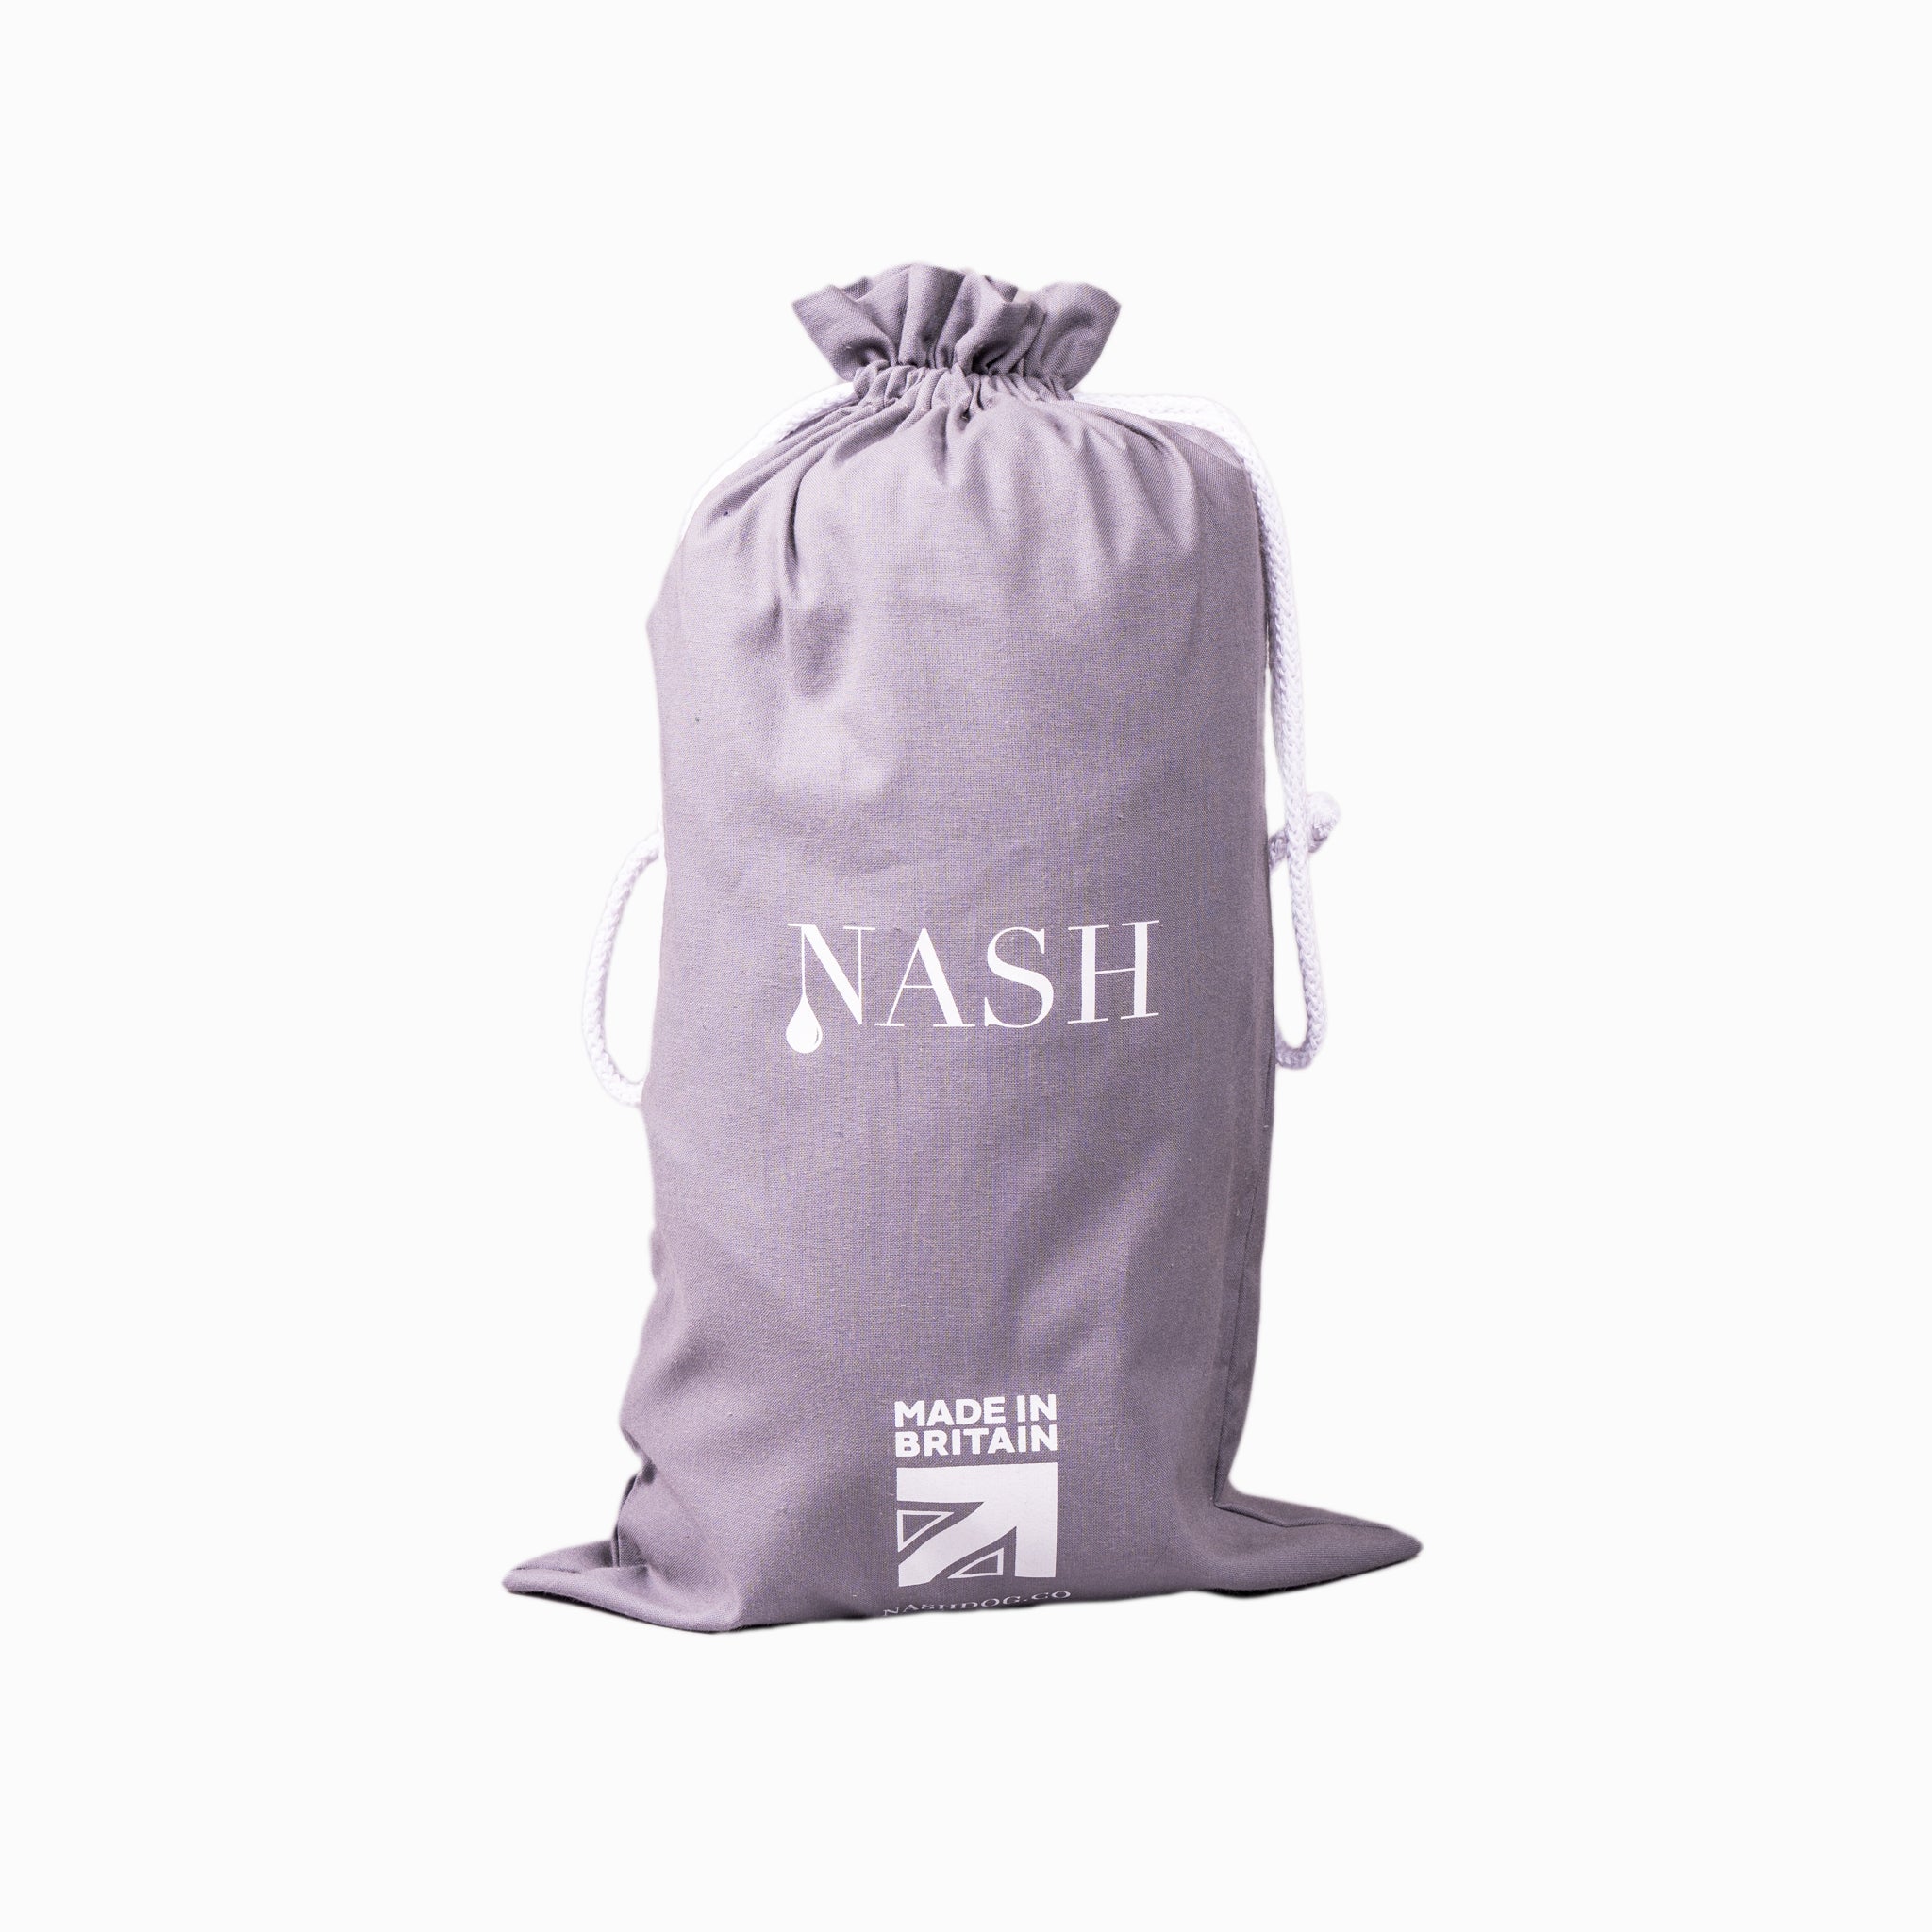 The NASH branded bag that comes with NASH bamboo dog drying mitts. 